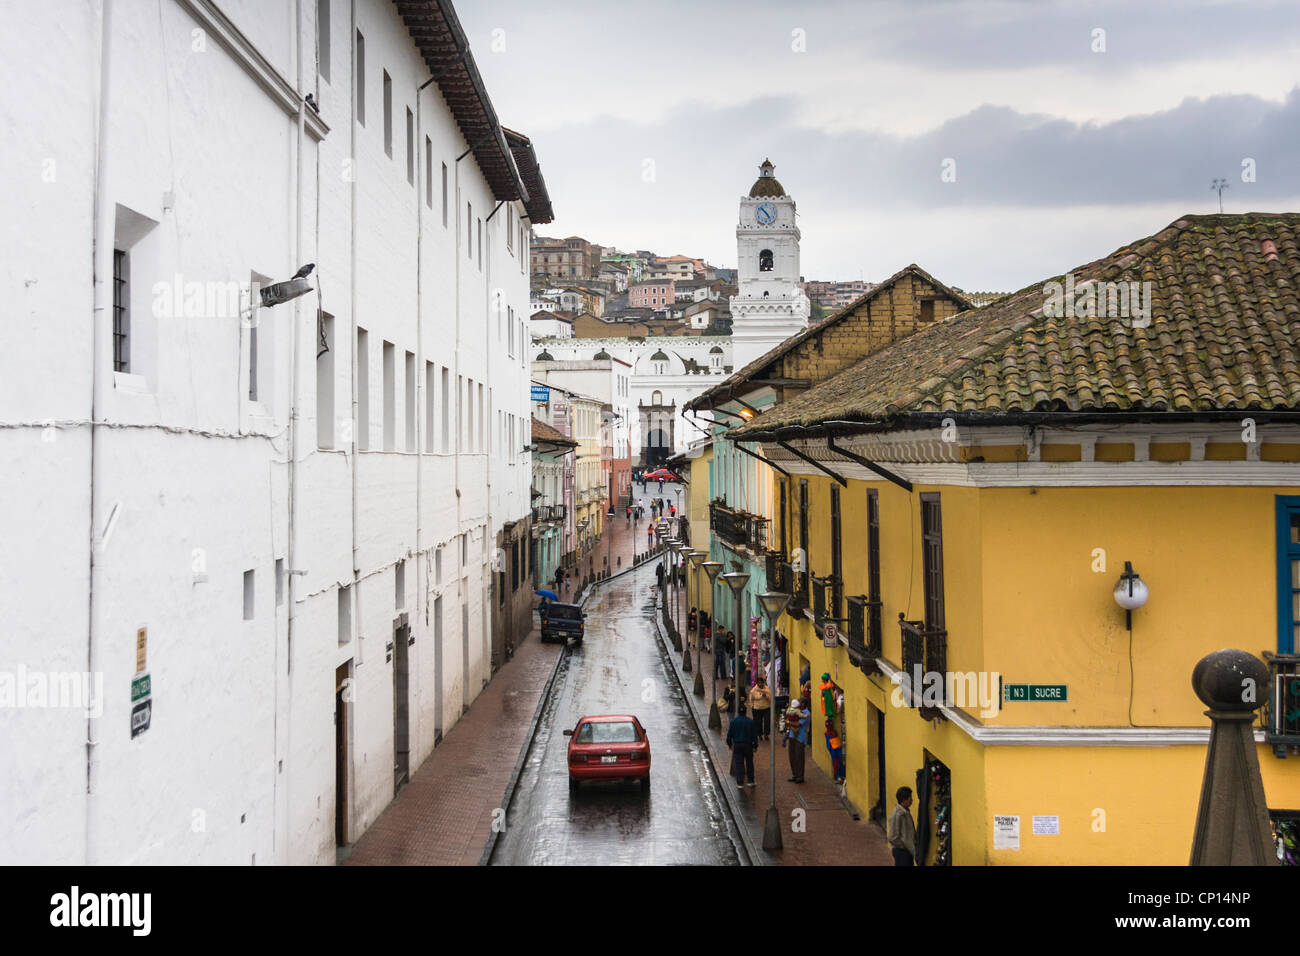 Street scene in Old Town, Quito, Ecuador - in the rain. Quito is in a rainforest, so rain is to be expected. Stock Photo